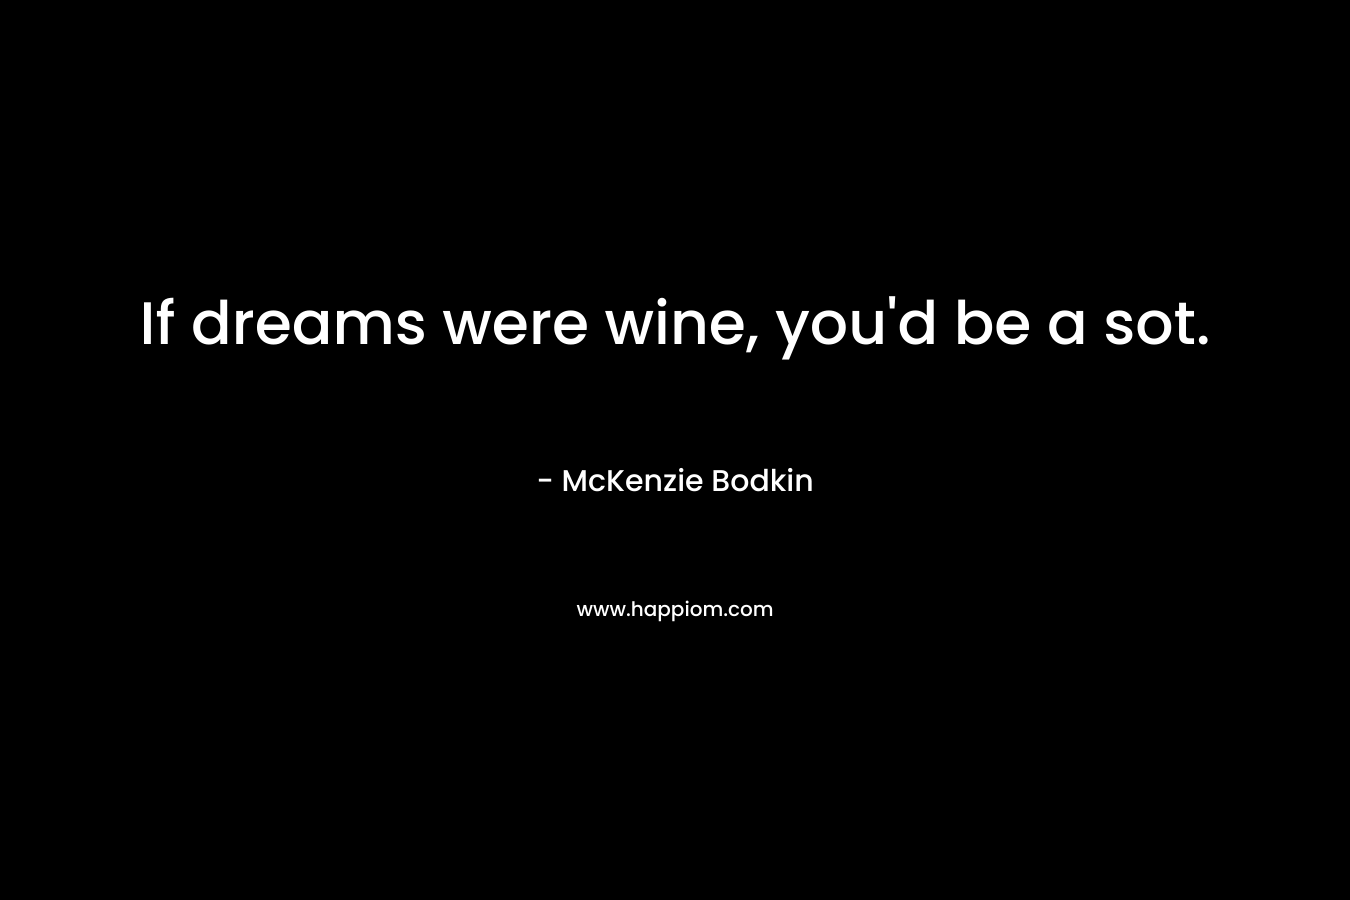 If dreams were wine, you'd be a sot.